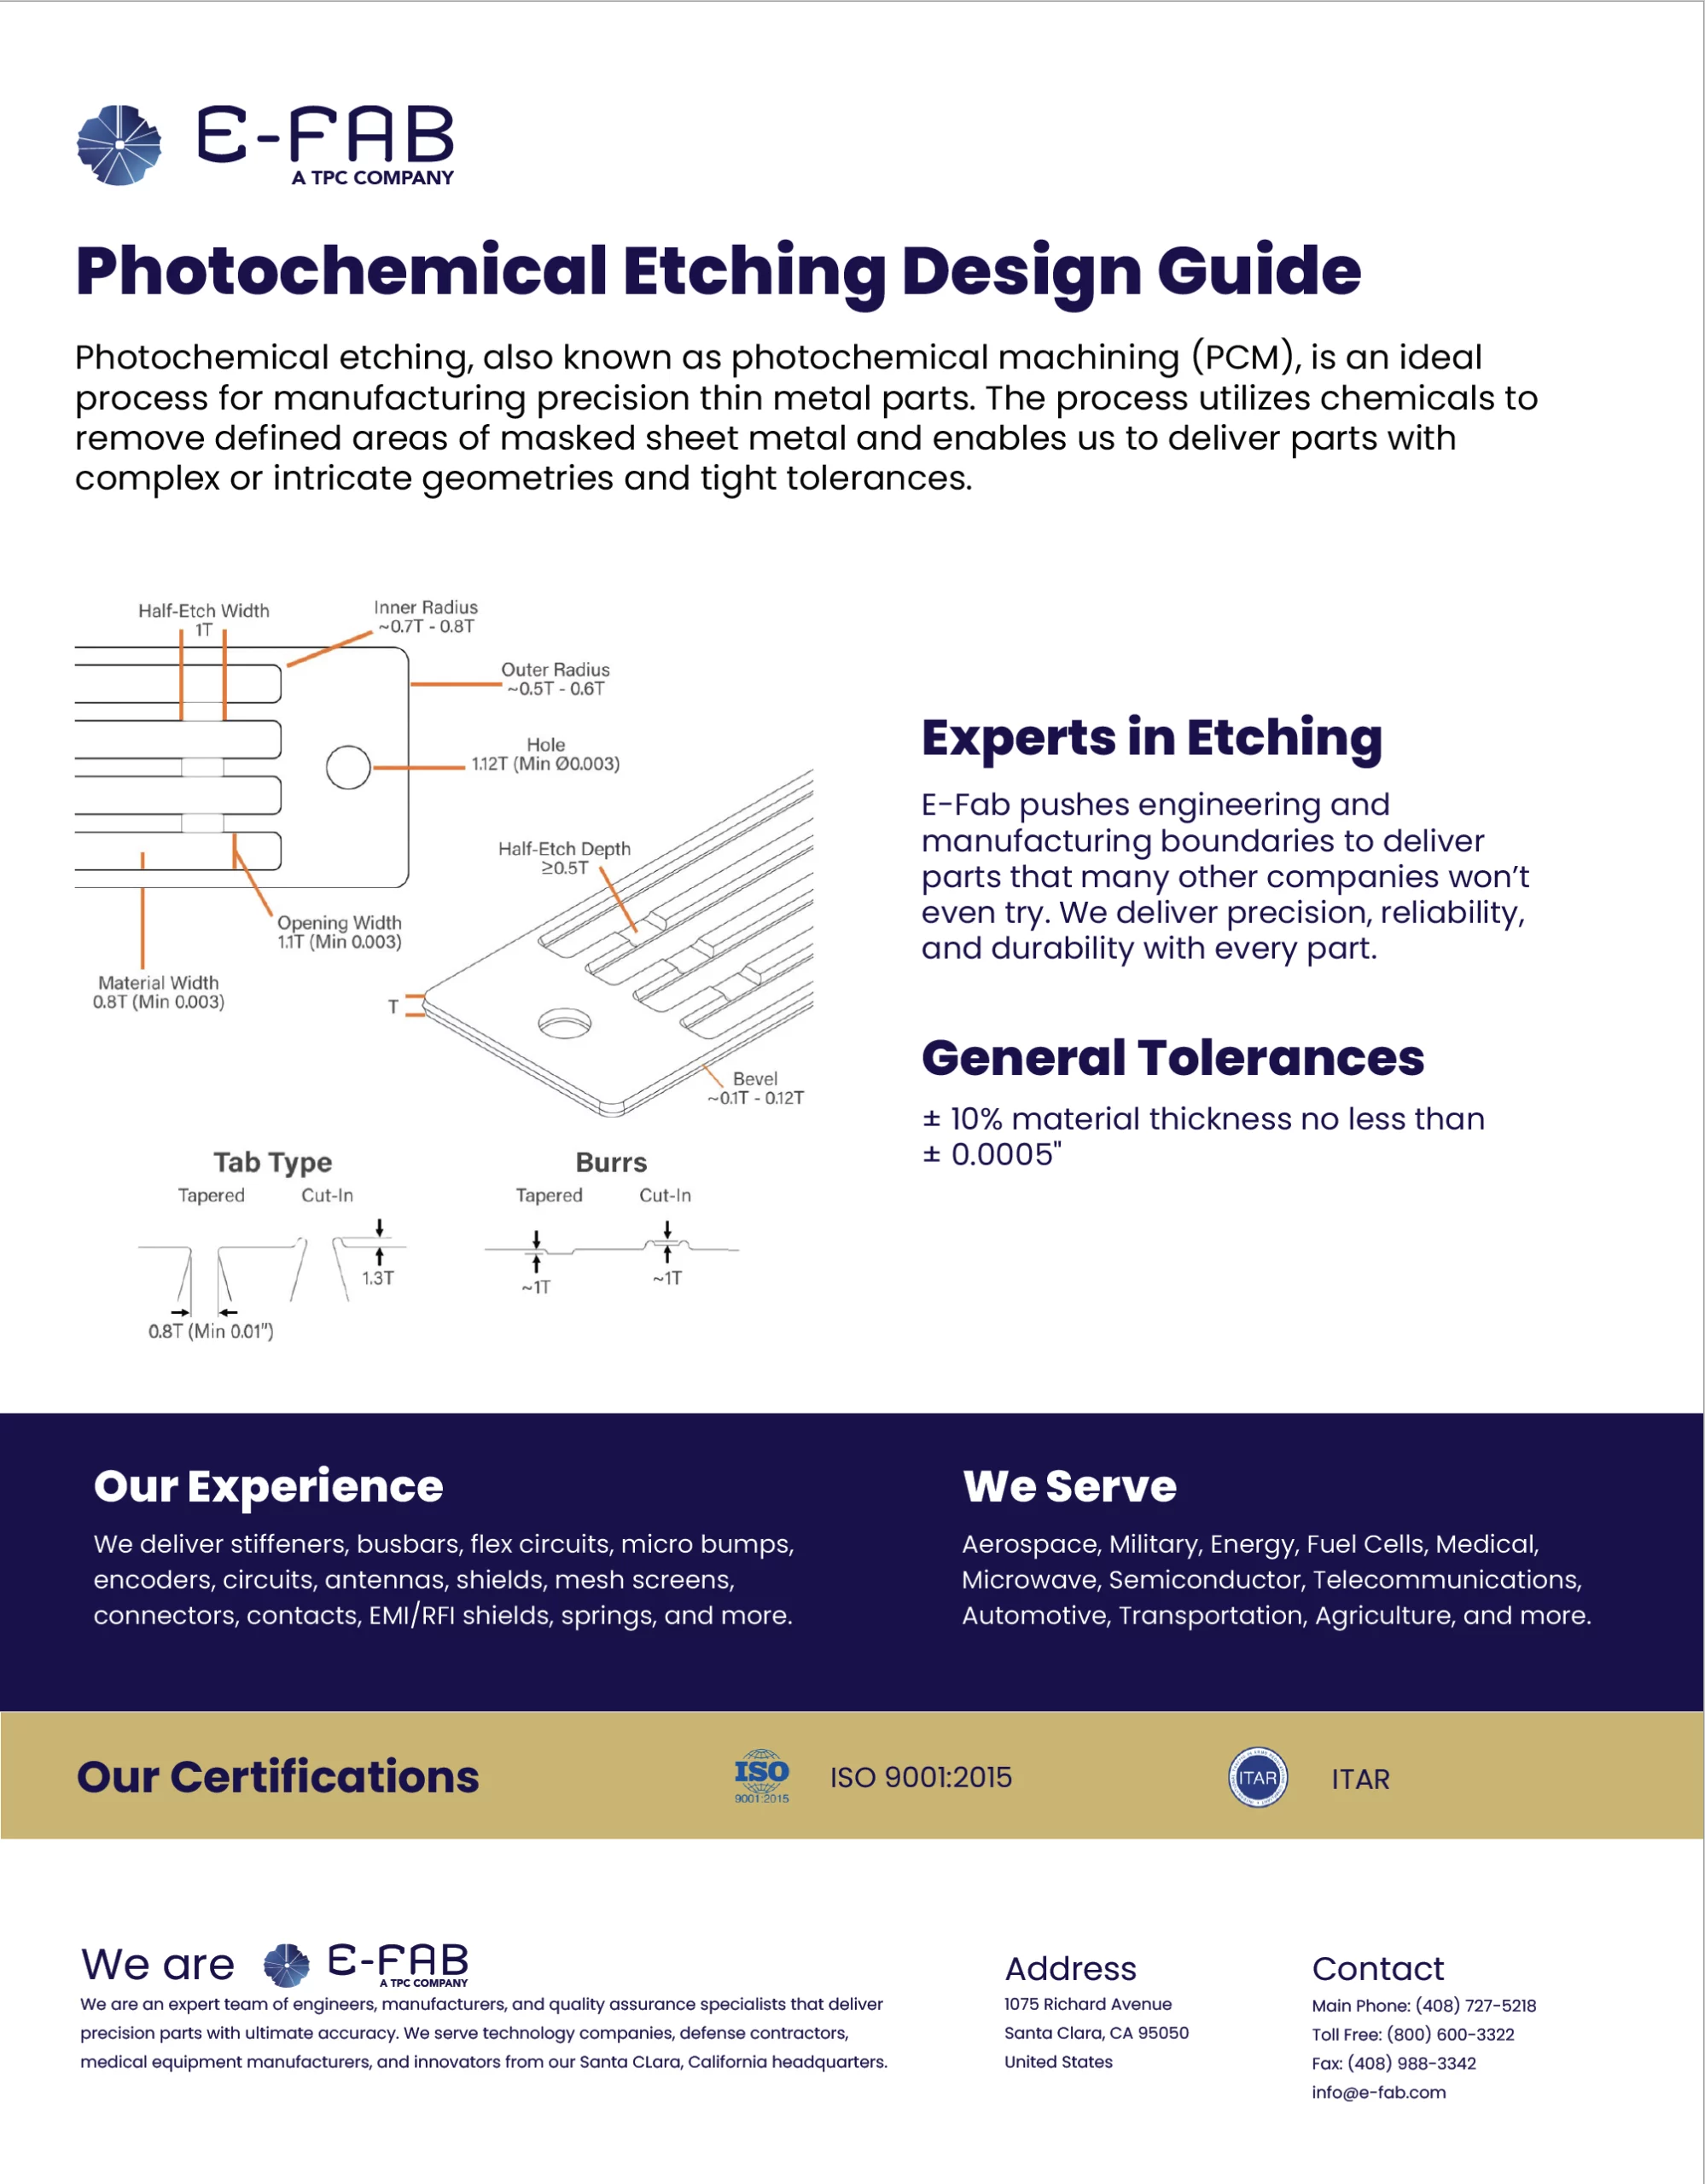 Photochemical Etching Design Guide - Manufacturing Process Diagram